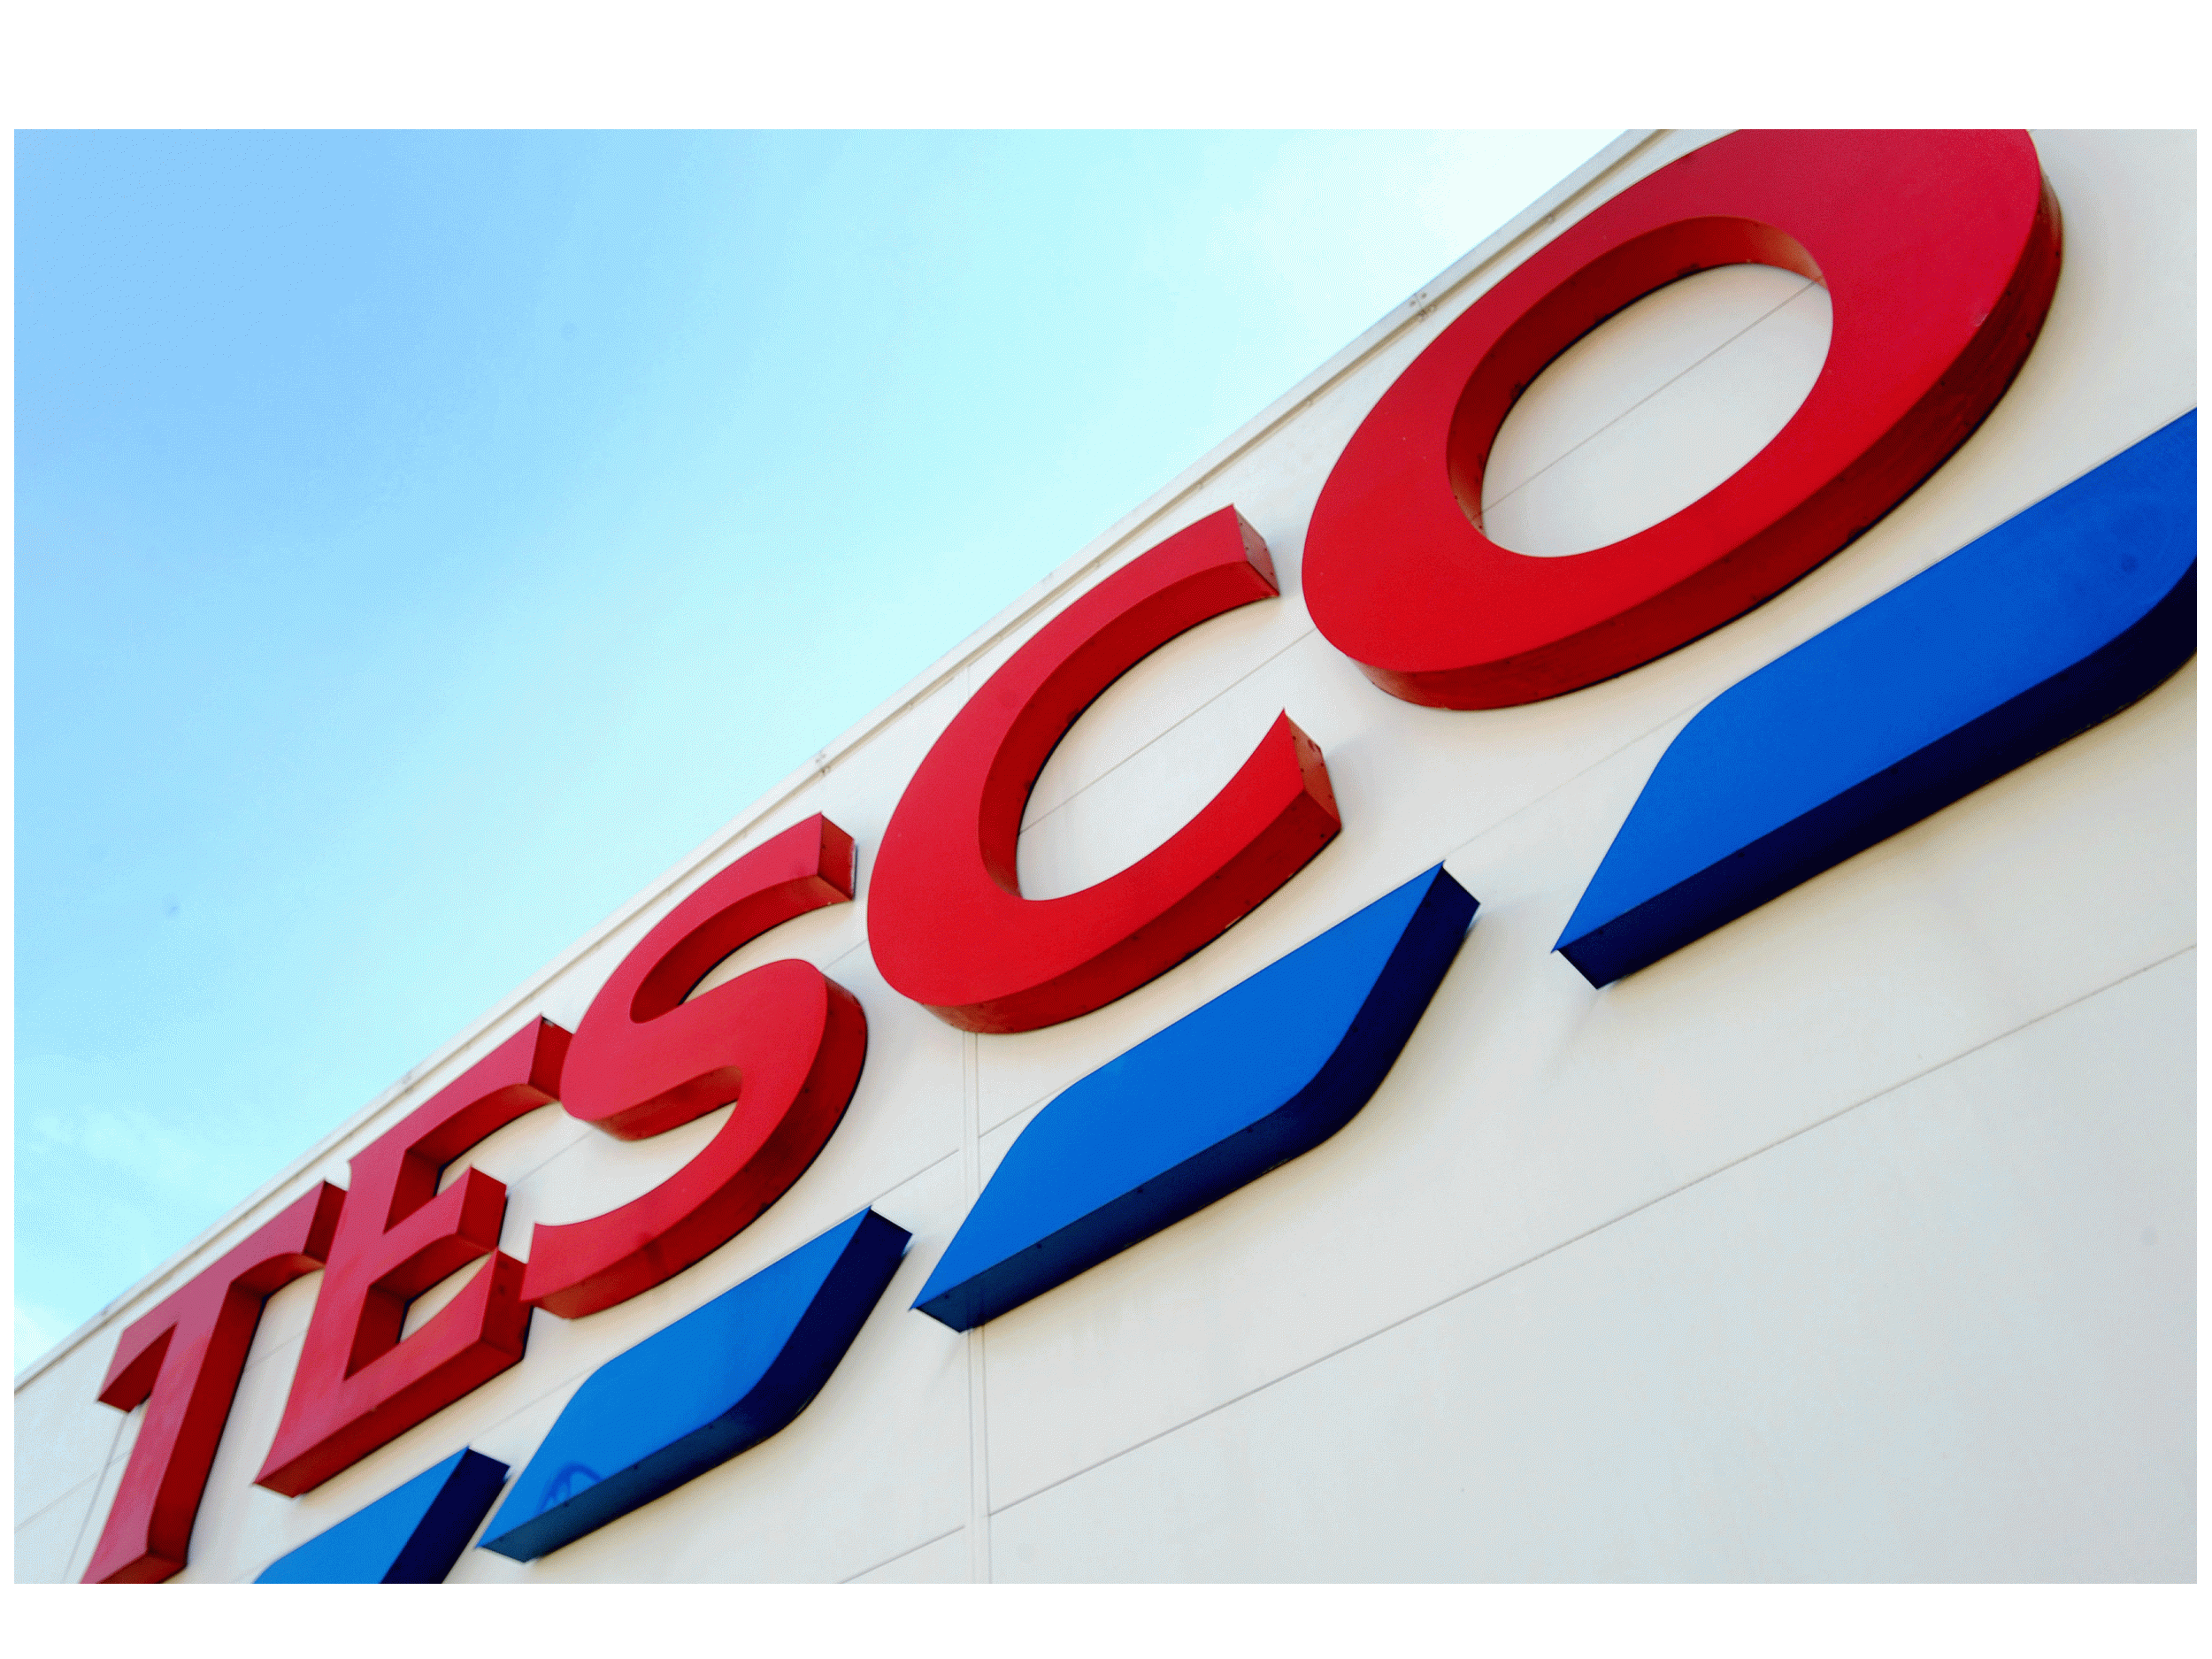 Tesco to use 100% renewable electricity this year in UK